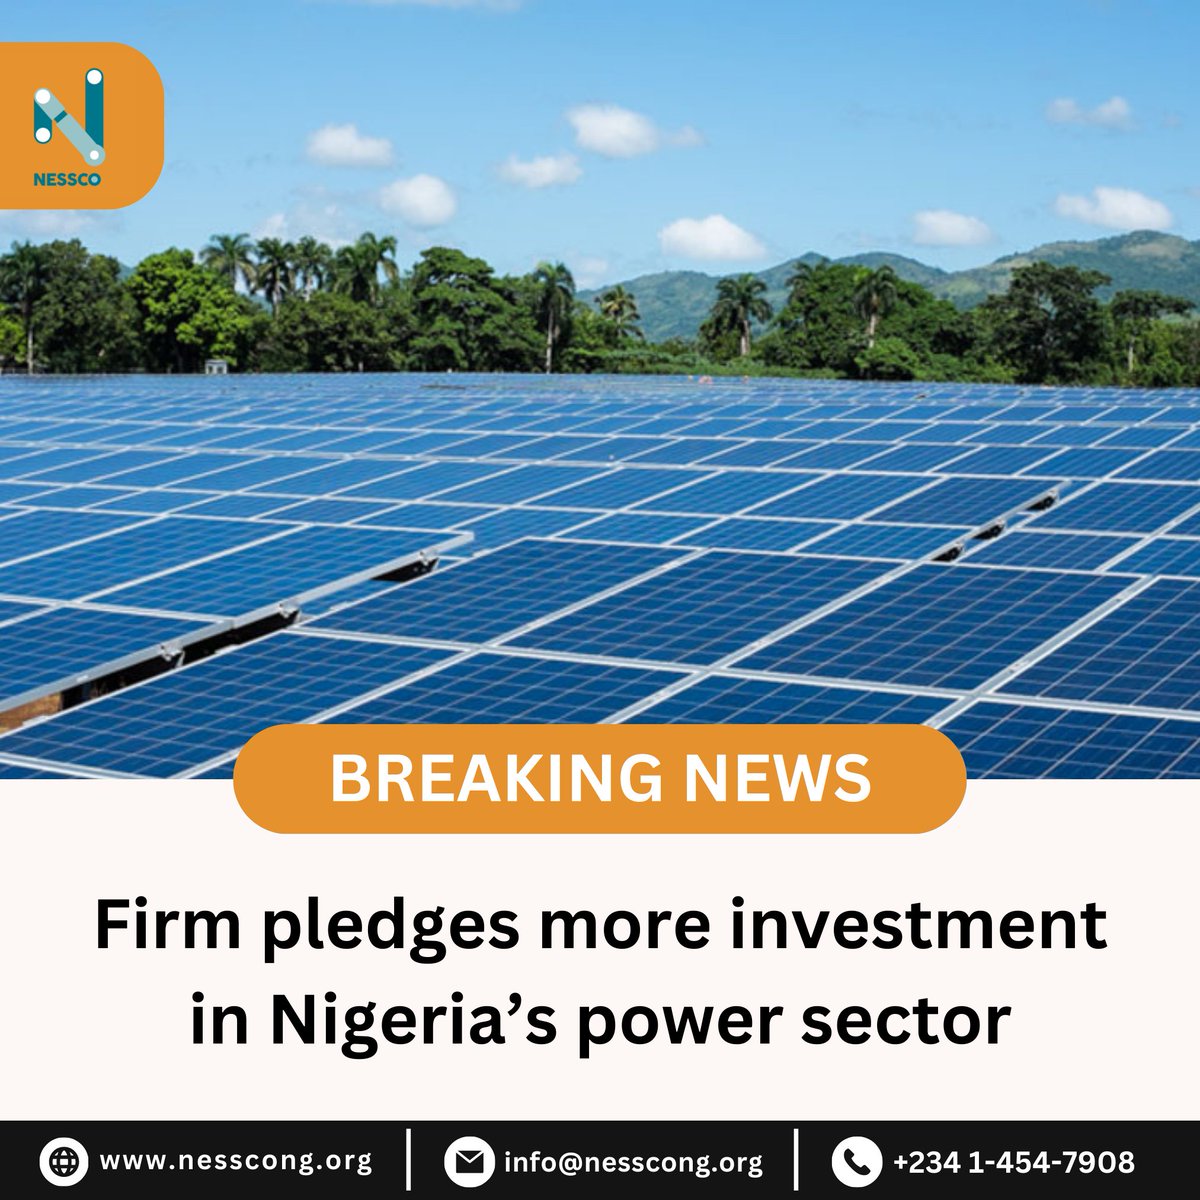 🔌 Empowering Nigeria's Power Sector: ARM-Harith Infrastructure Fund's Pledge 🔋

✅ AD Power HoldCo Launch: Investing in Renewable Energy Equity Financing
✅ Focus on Off-Grid and Mini-Grid Projects (Less than 1MW)
 #PoweringNigeria #RenewableEnergy #InvestmentInnovation #nessco